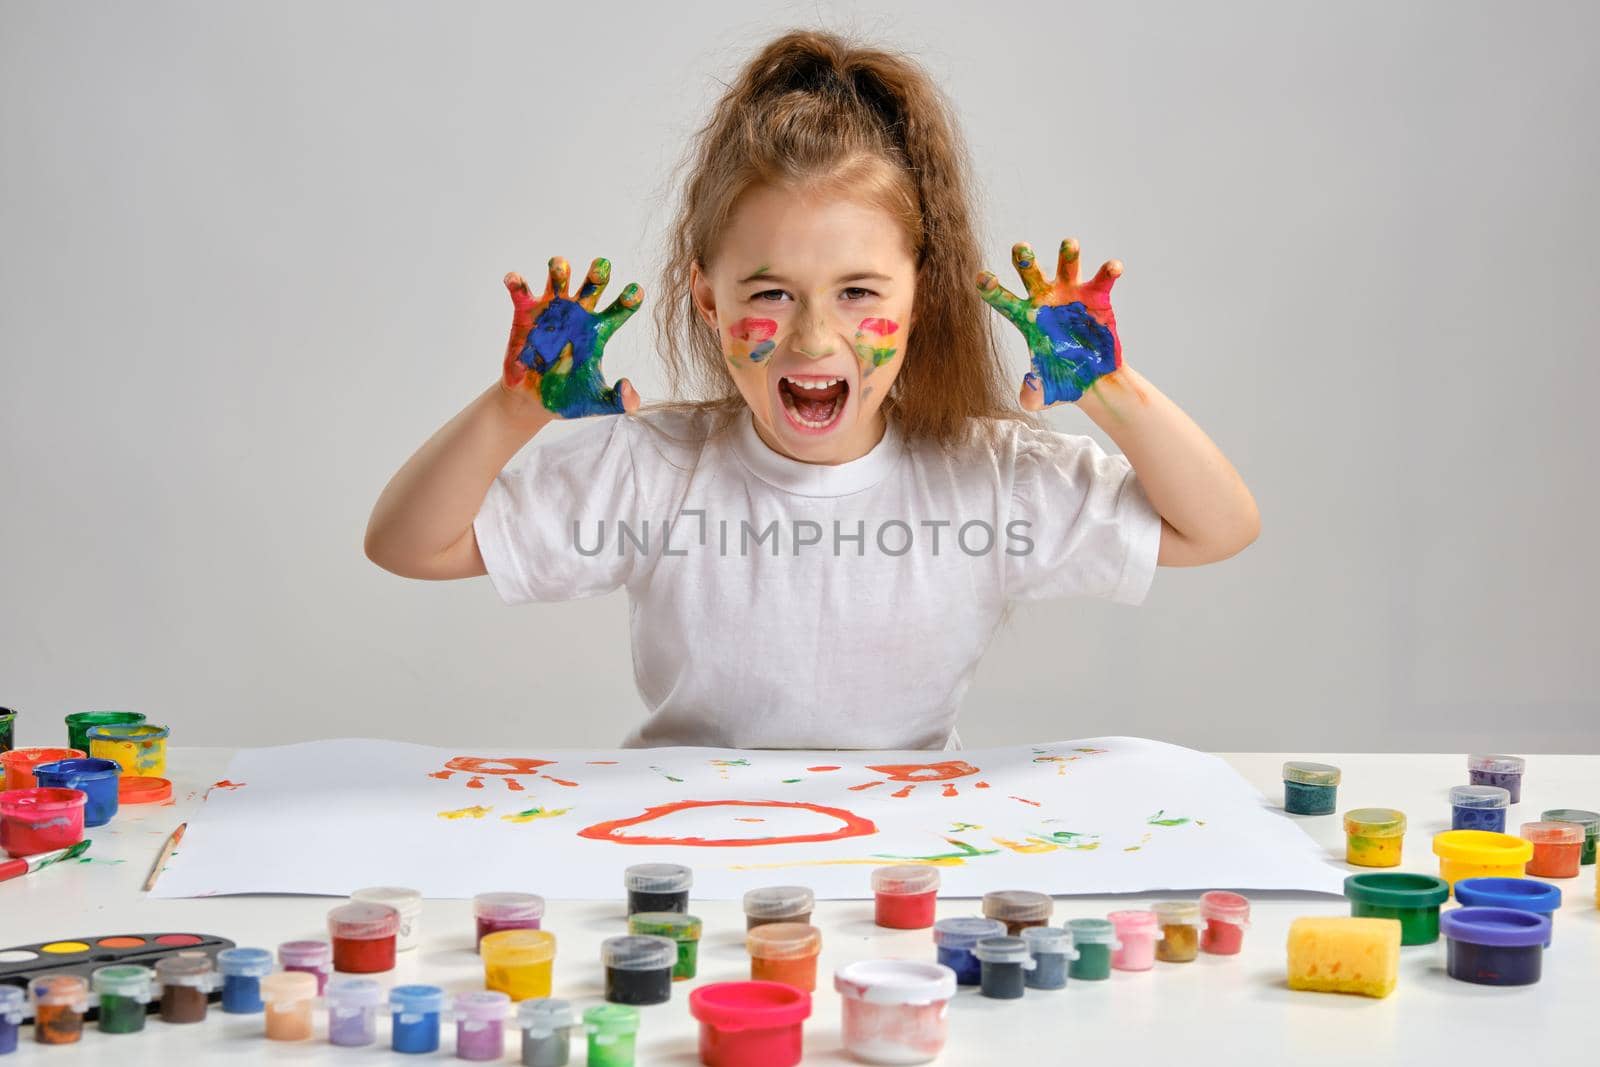 Pretty brunette child artist with a ponytail, in a white t-shirt, is sitting at a table with a whatman and a lot of multi-colored paints on it. She is posing with painted face and hands, scaring us. Art studio. Isolated on white background. Drawing process. Medium close-up.